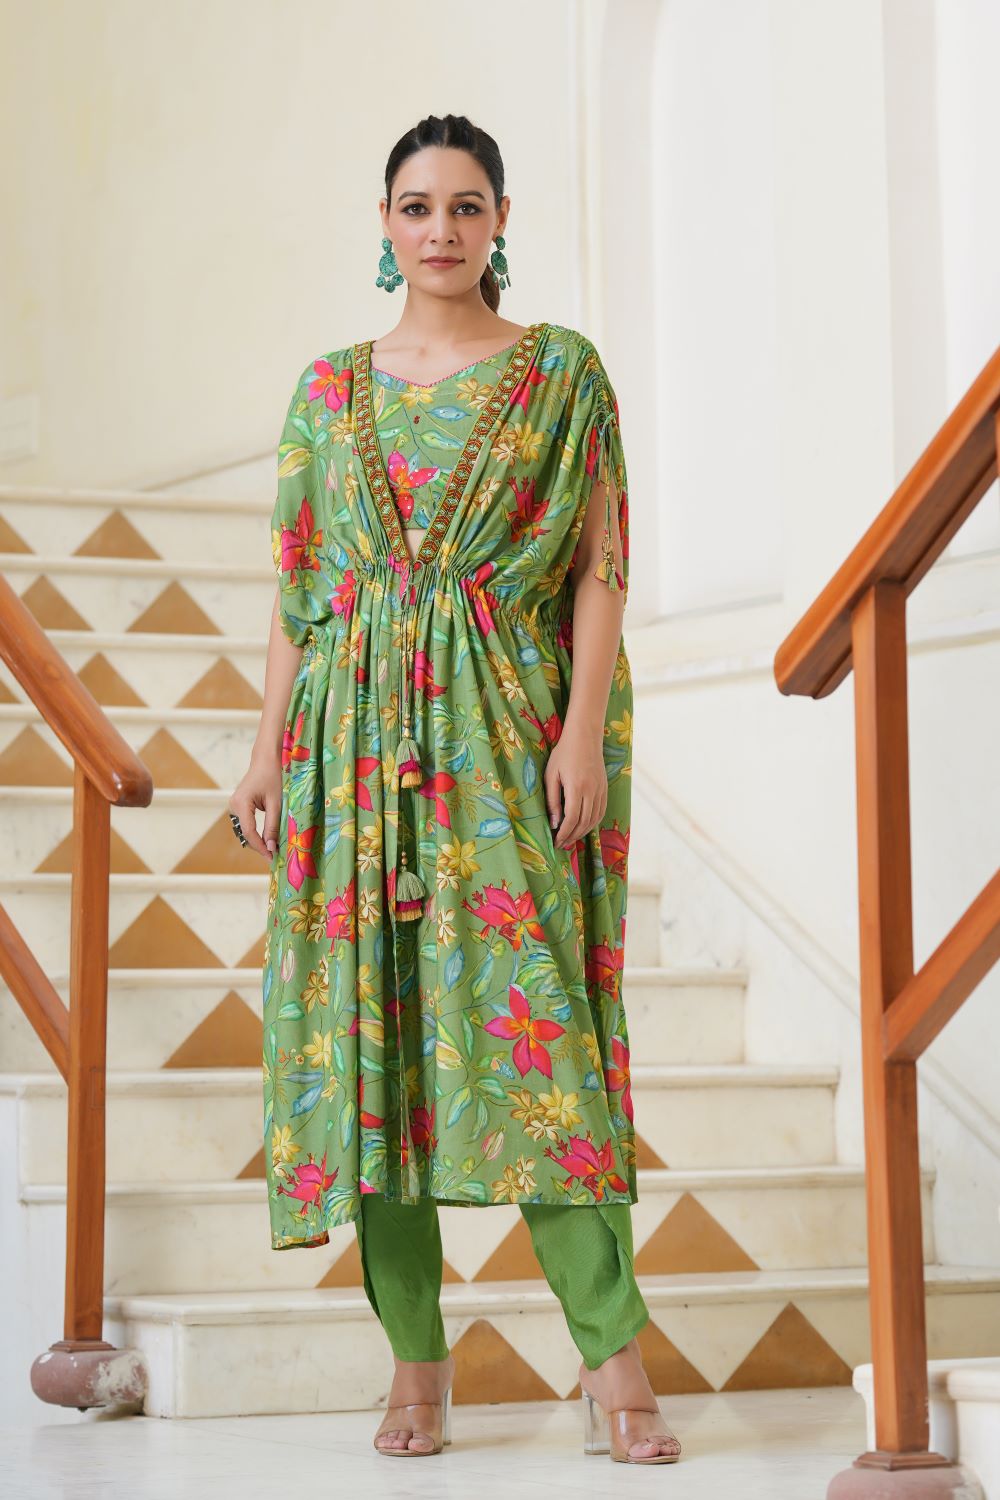 Green Party Dress with Gold Sequins | Pakistani Women's Fashion